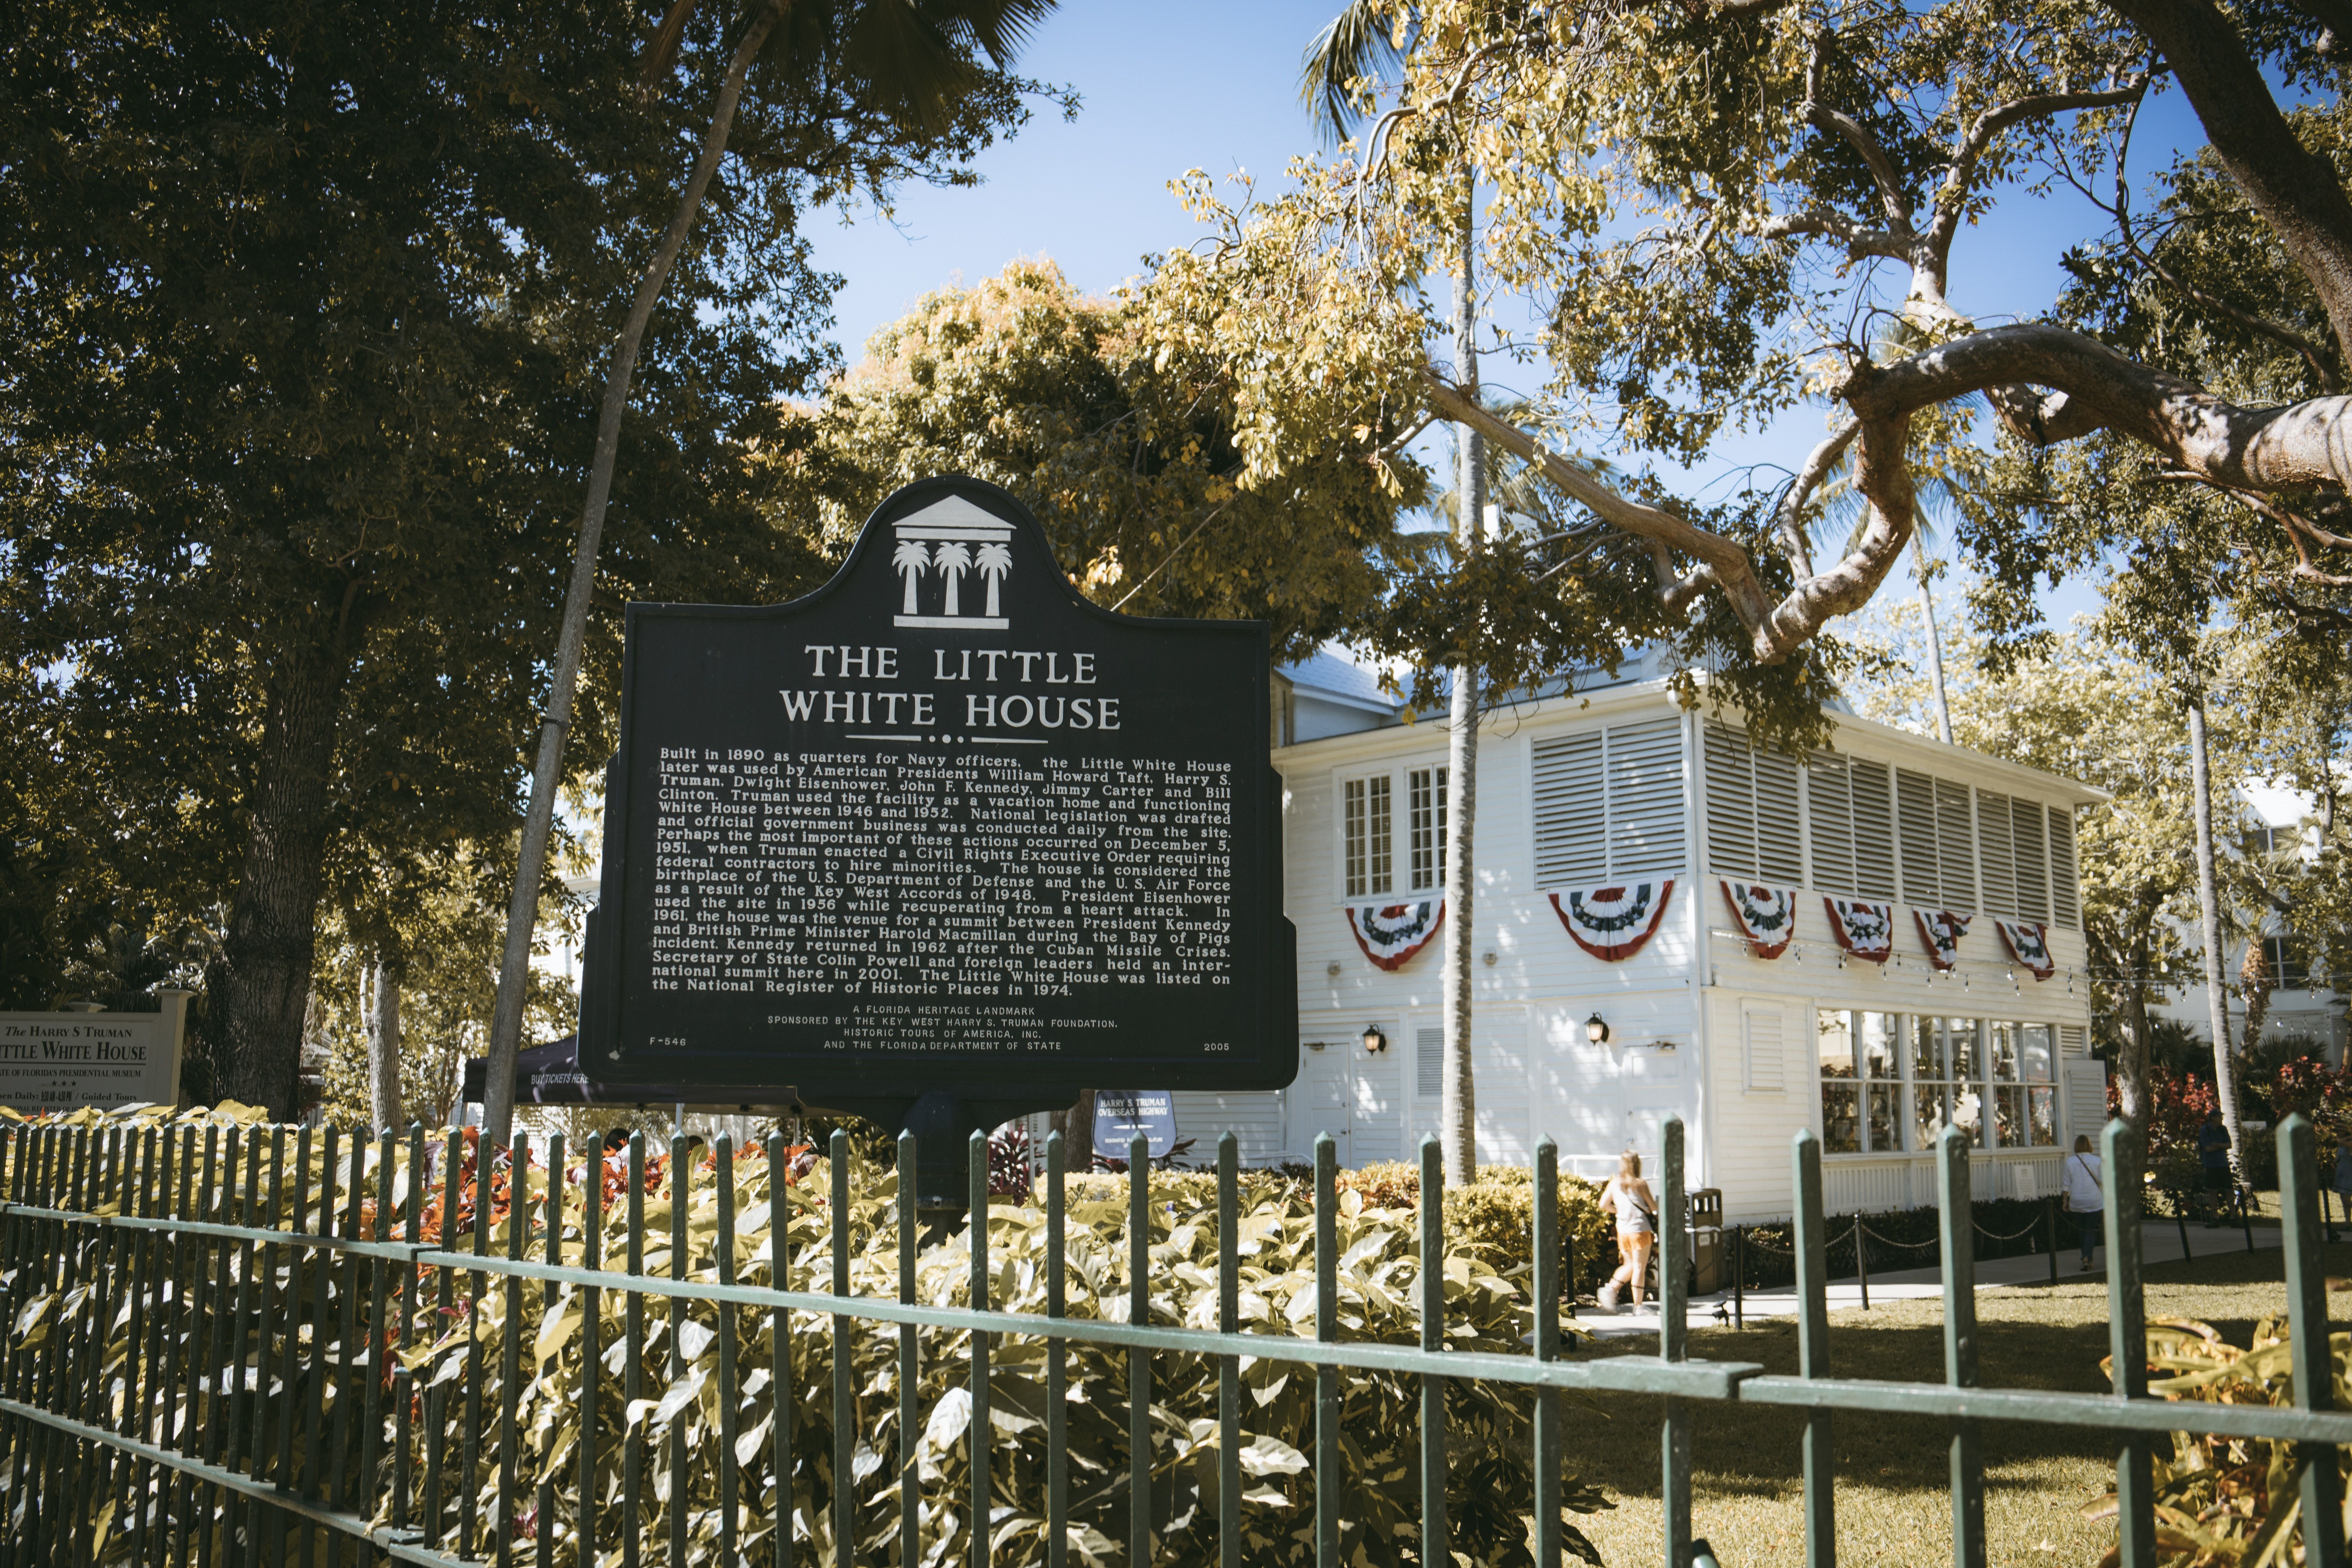 The Little White House in Key West, Florida